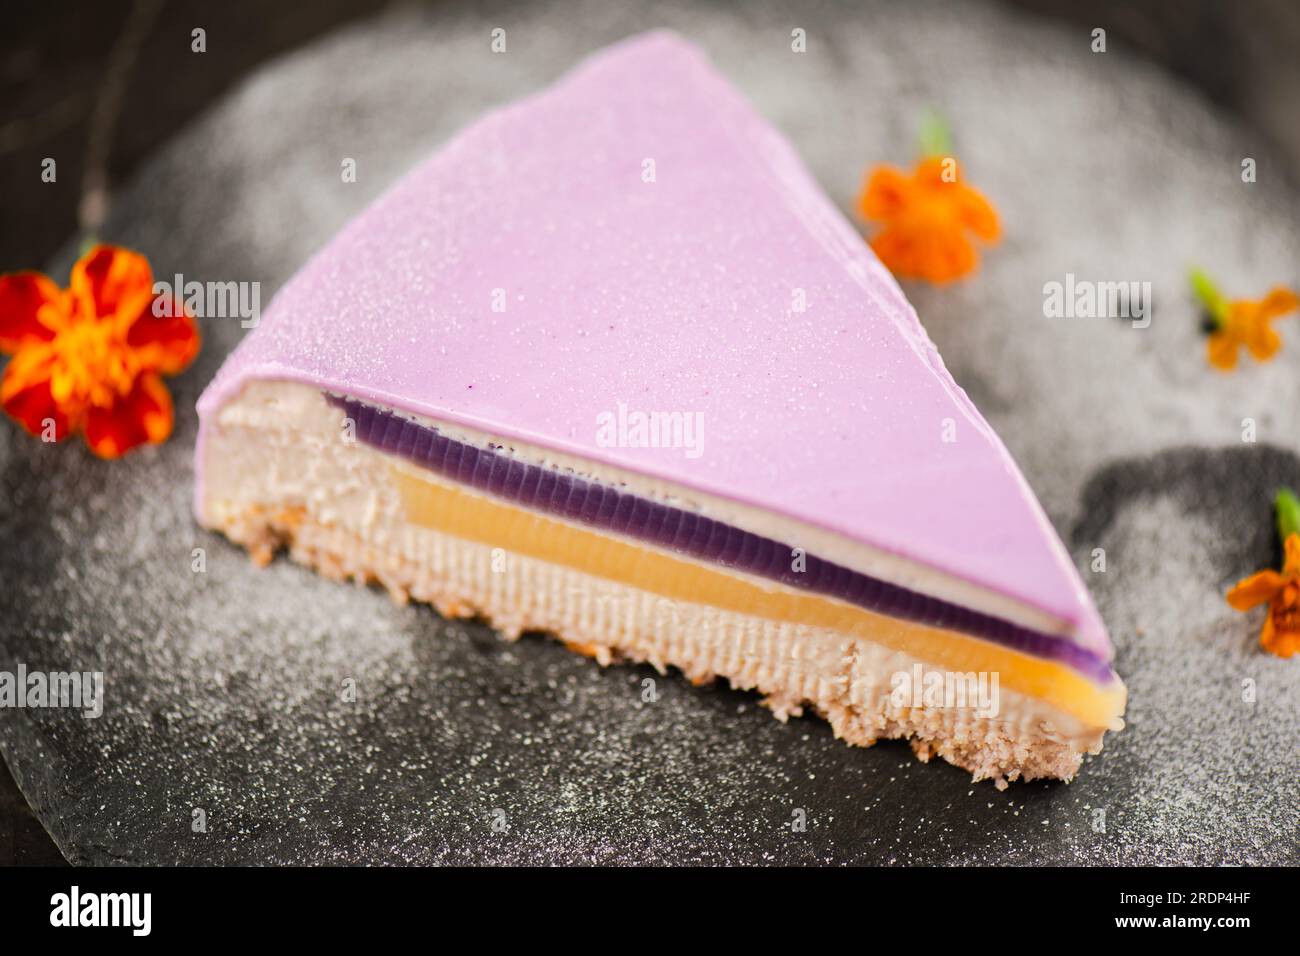 A slice of Gourmet Ube Entremet Cake also known as purple yam with layered sponge cake, ube jelly, evaporated milk jelly, and ube mousse, covered in a Stock Photo